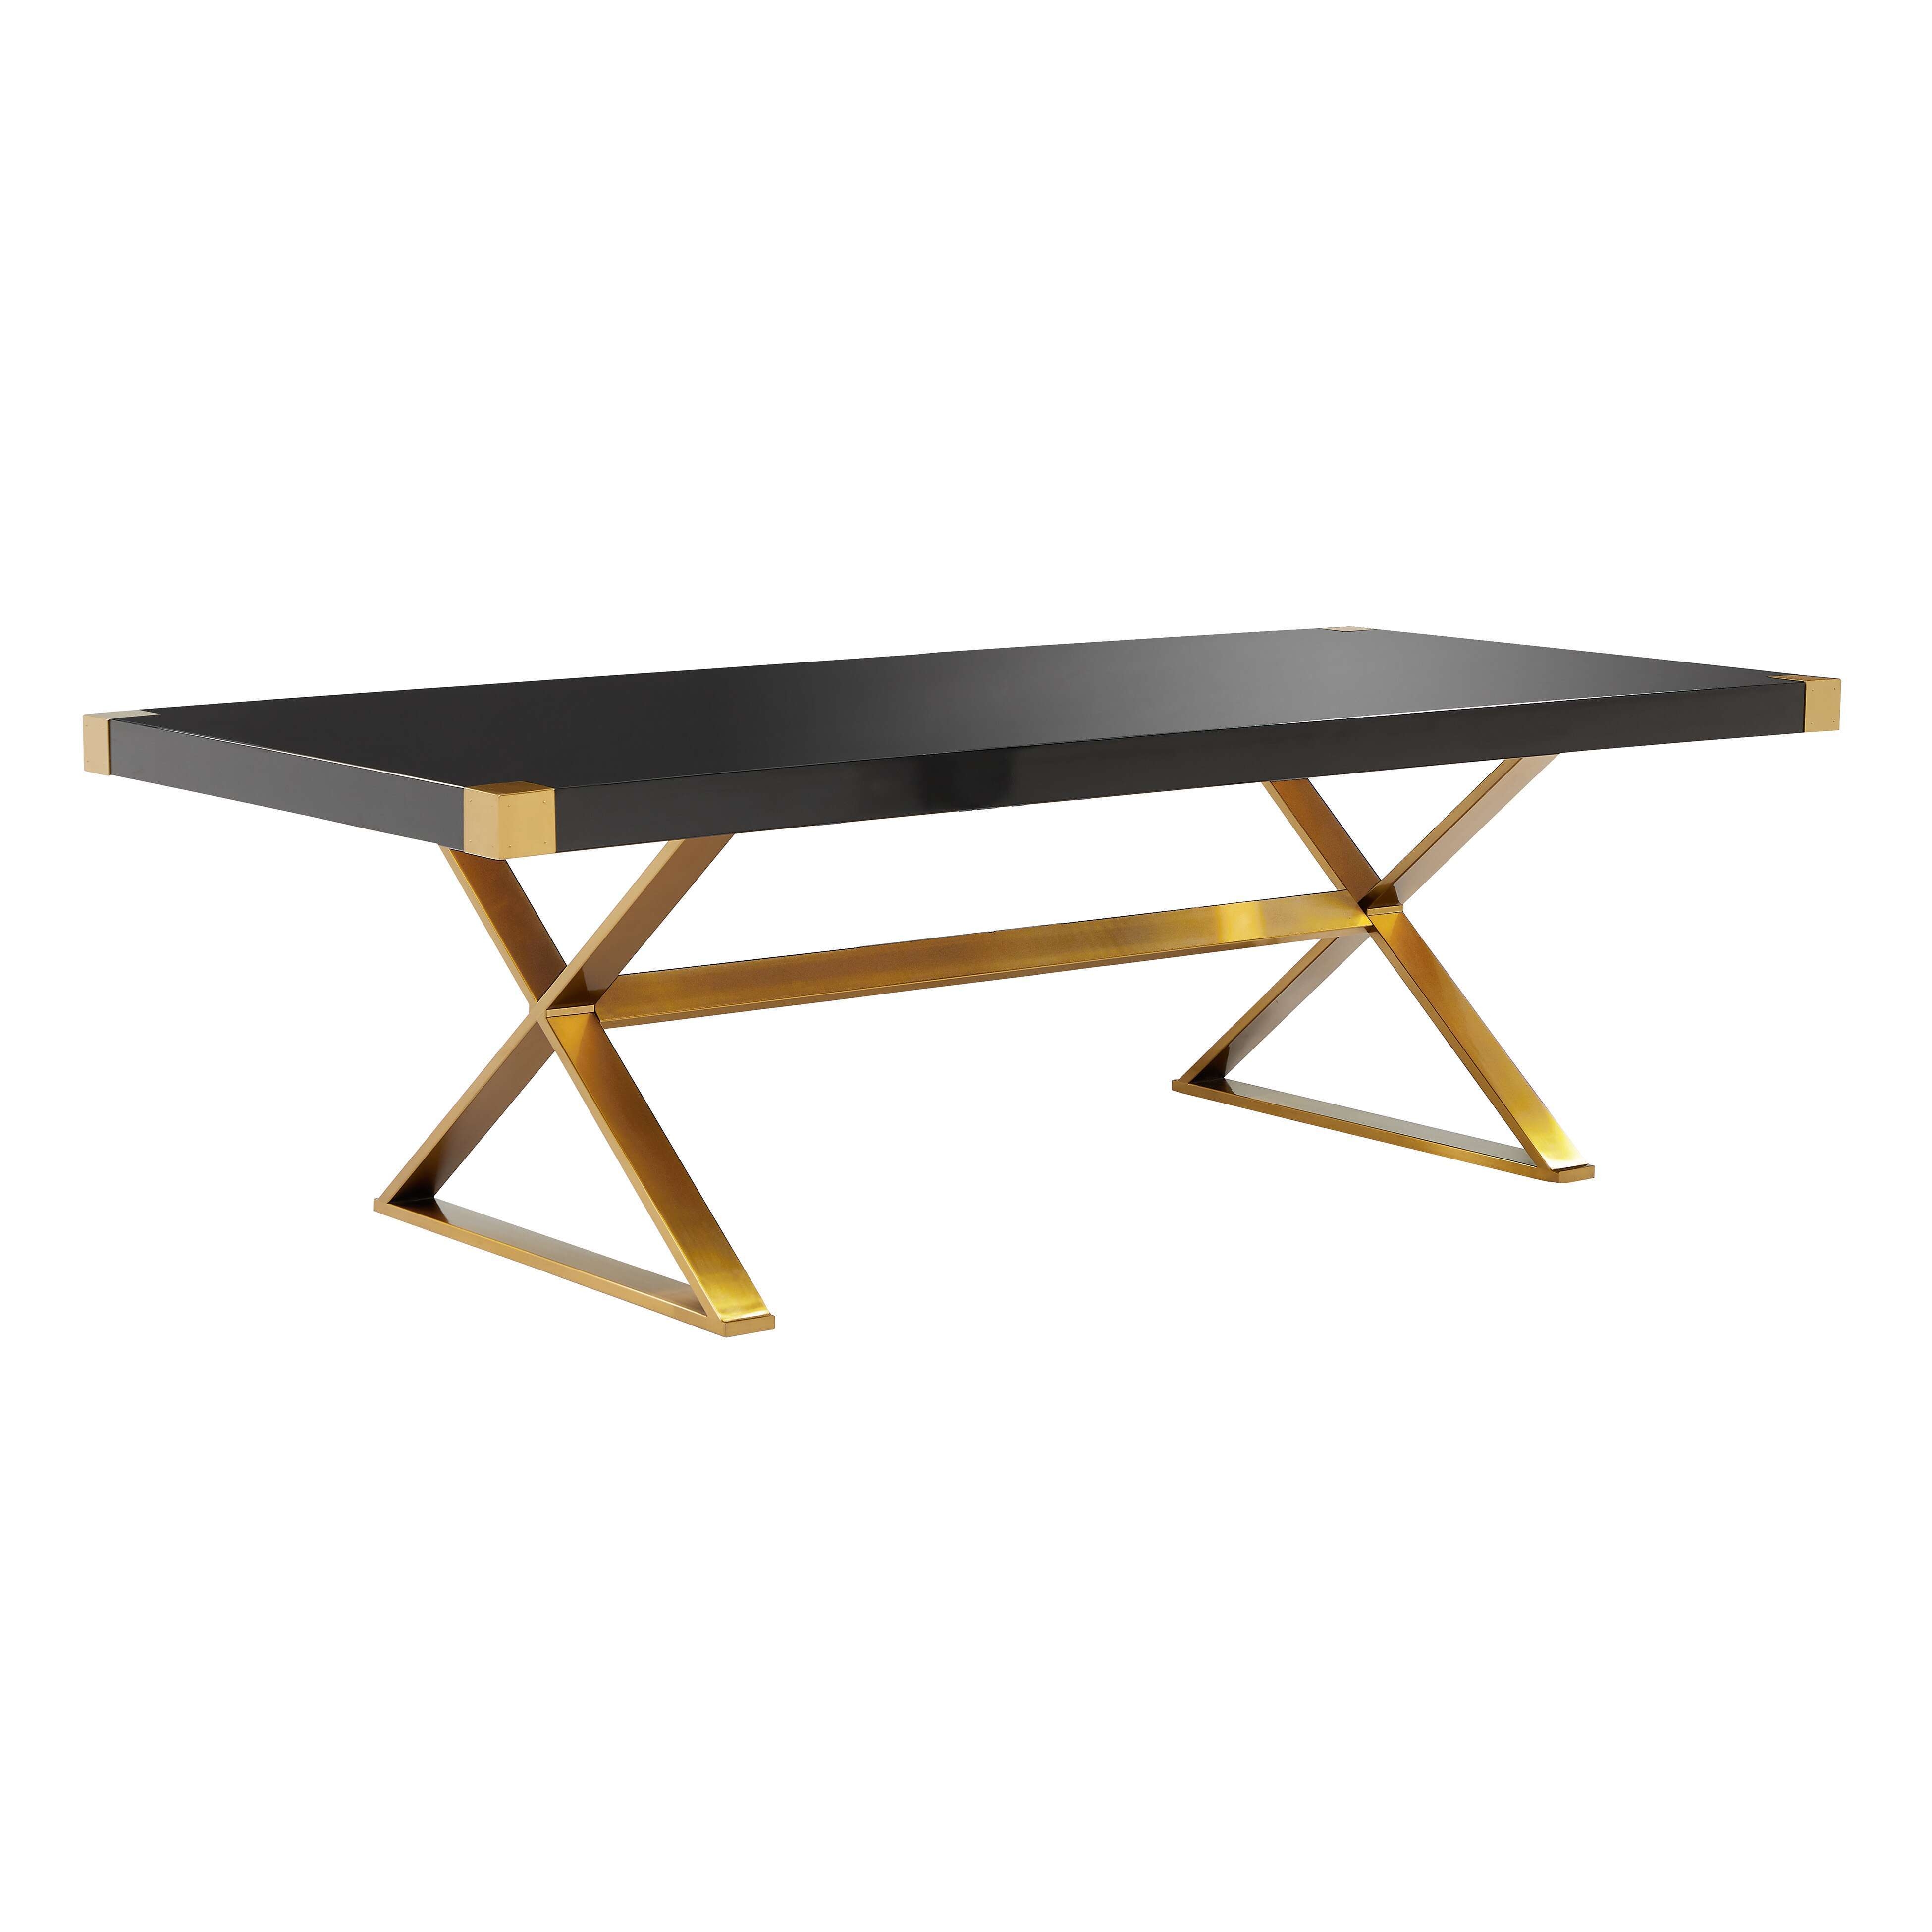 Adeline Black Lacquer Dining Table - Image 0